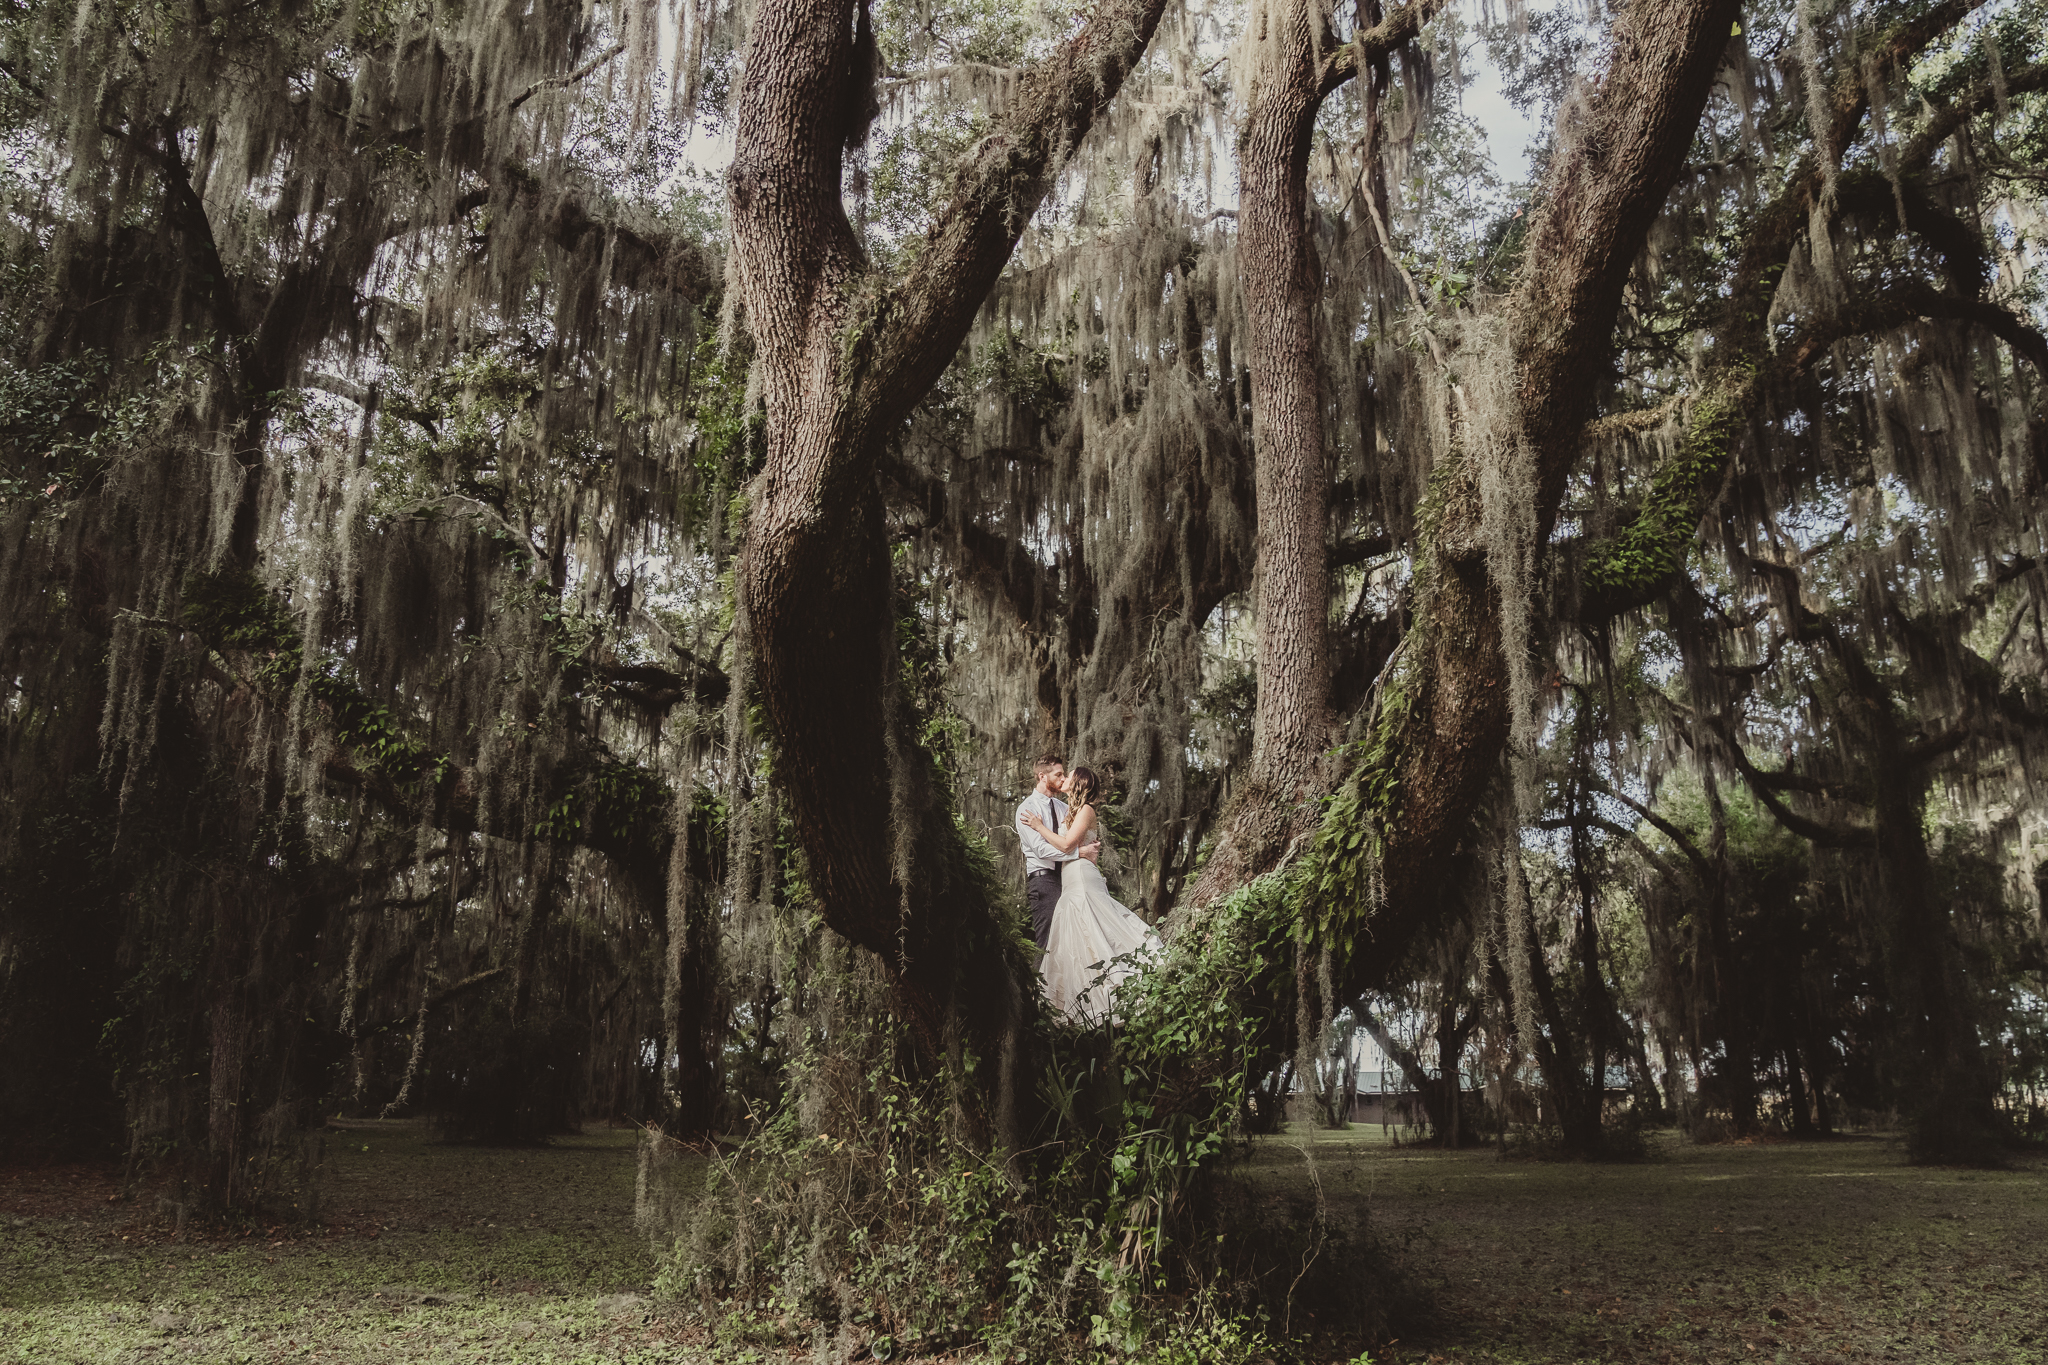 10 year anniversary photography session at Chem cell club in Fernandina beach Florida by The Living Lenz, Wedding photographer